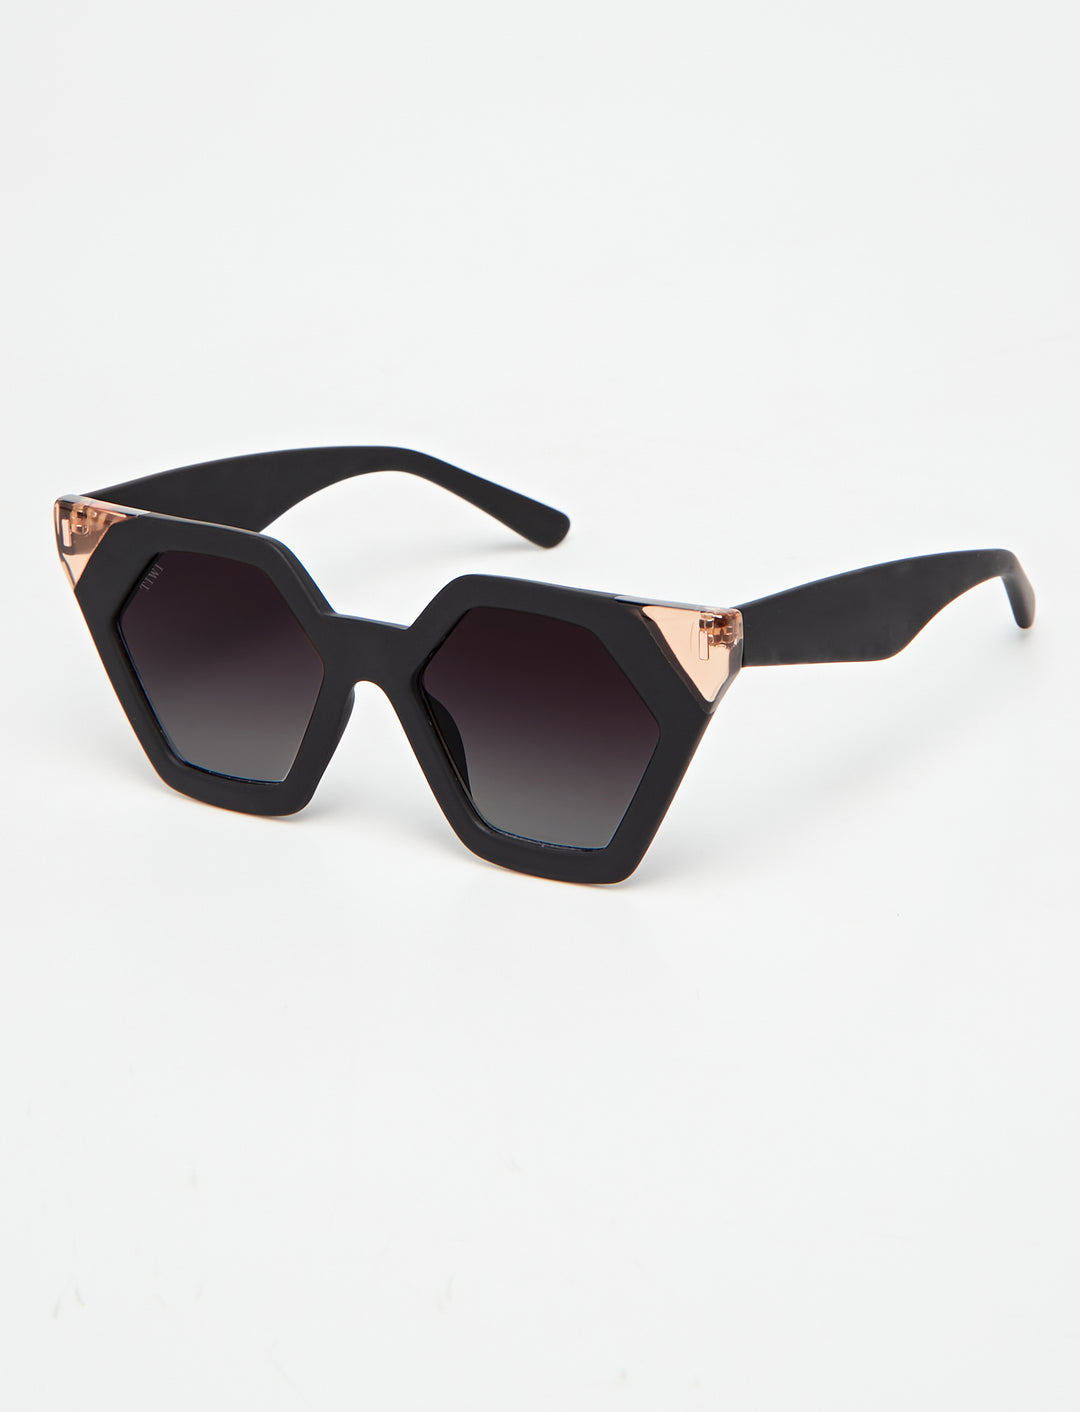 HEXAGON II Sunglasses Available in more colors   